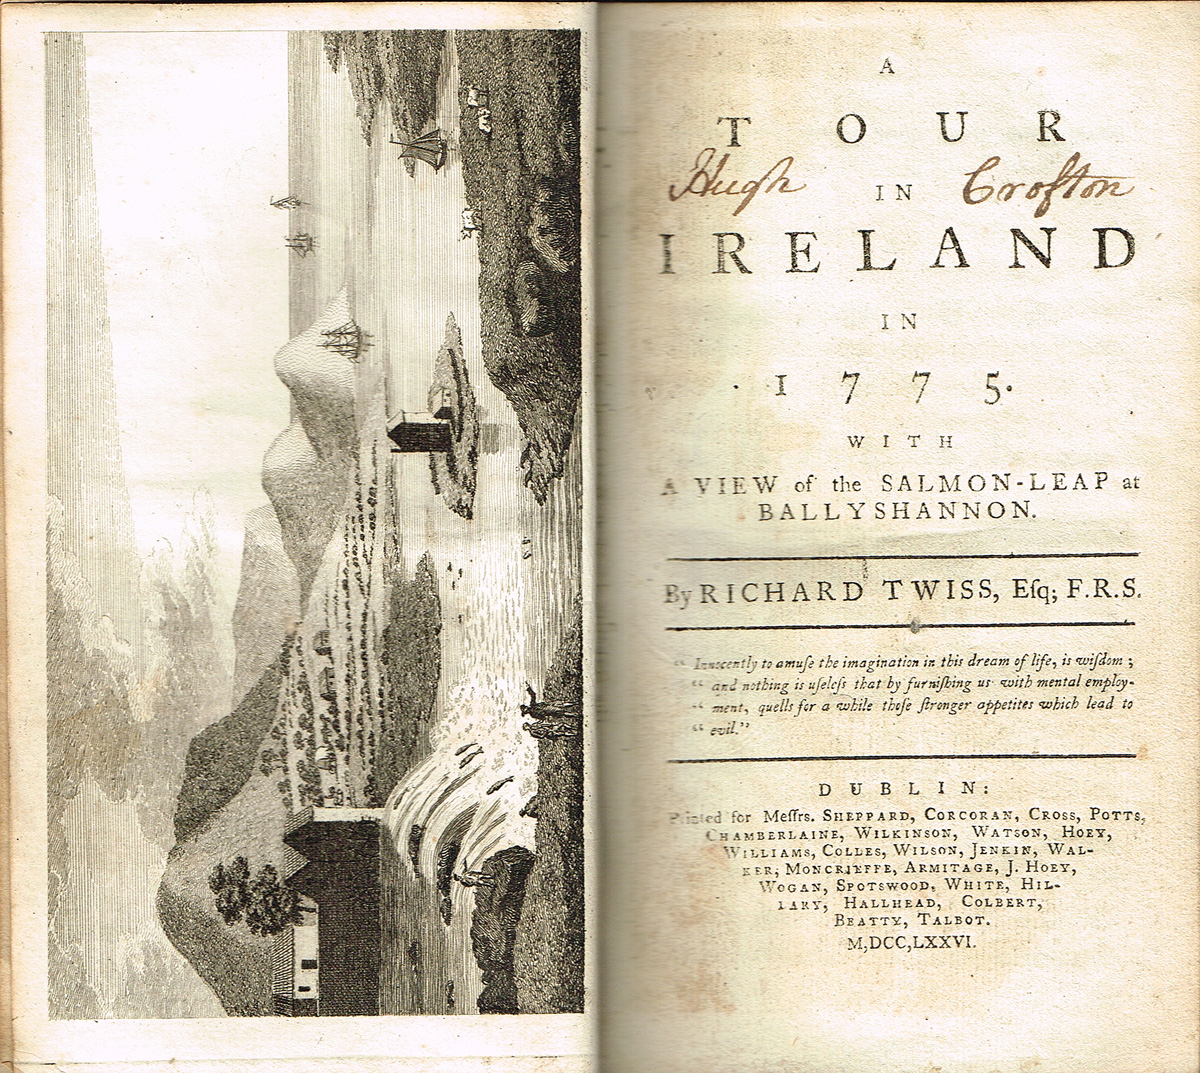 Twiss, Richard. A Tour in Ireland in 1775 with a View of the Salmon Leap at Ballyshannon. at Whyte's Auctions